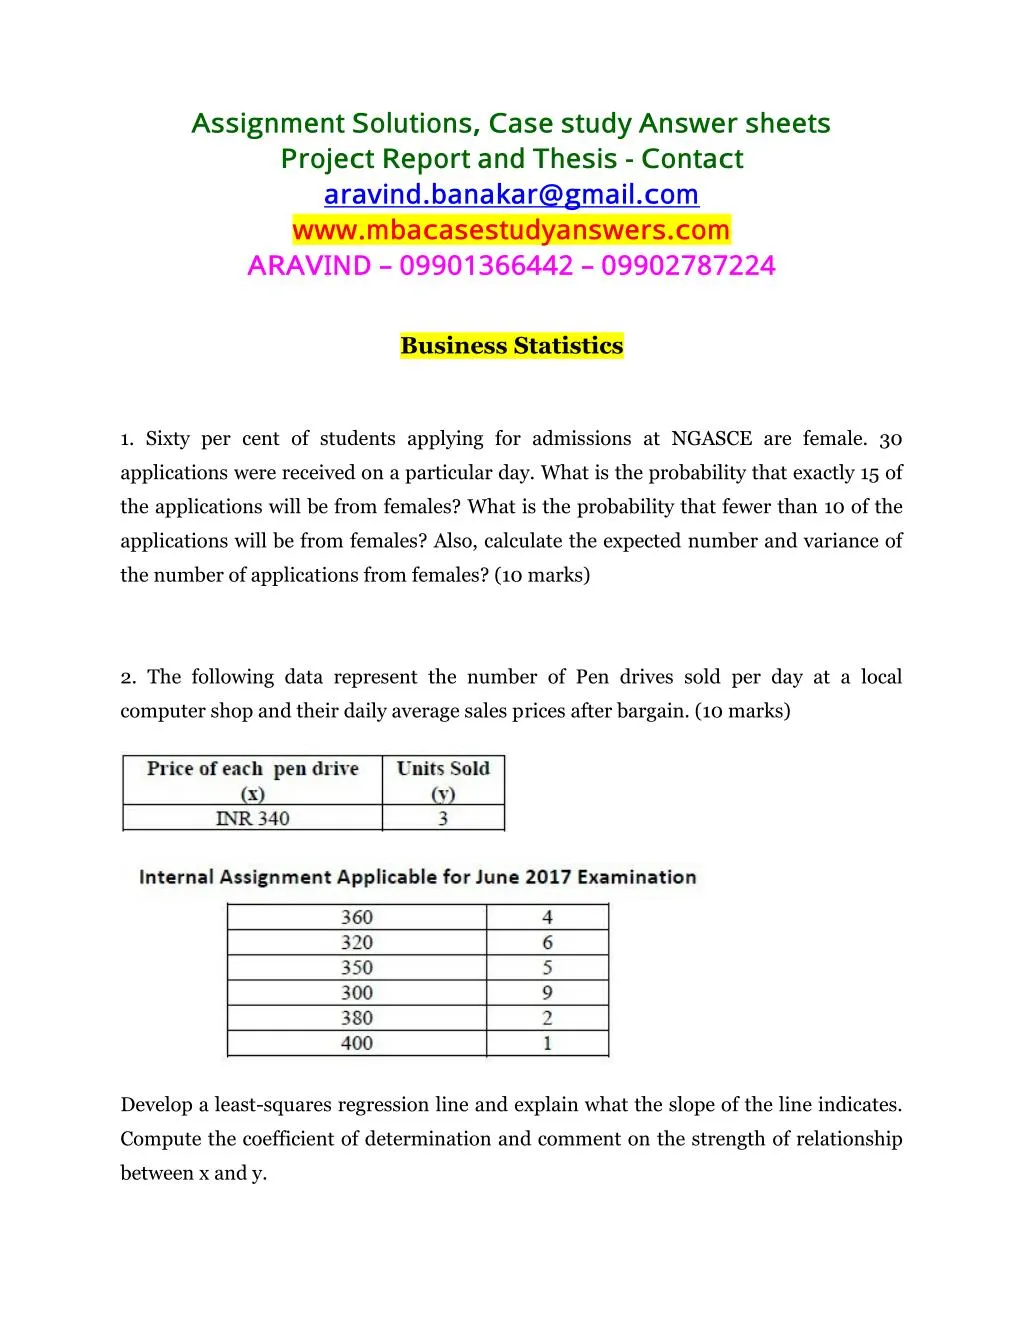 assignment solutions case study answer sheets